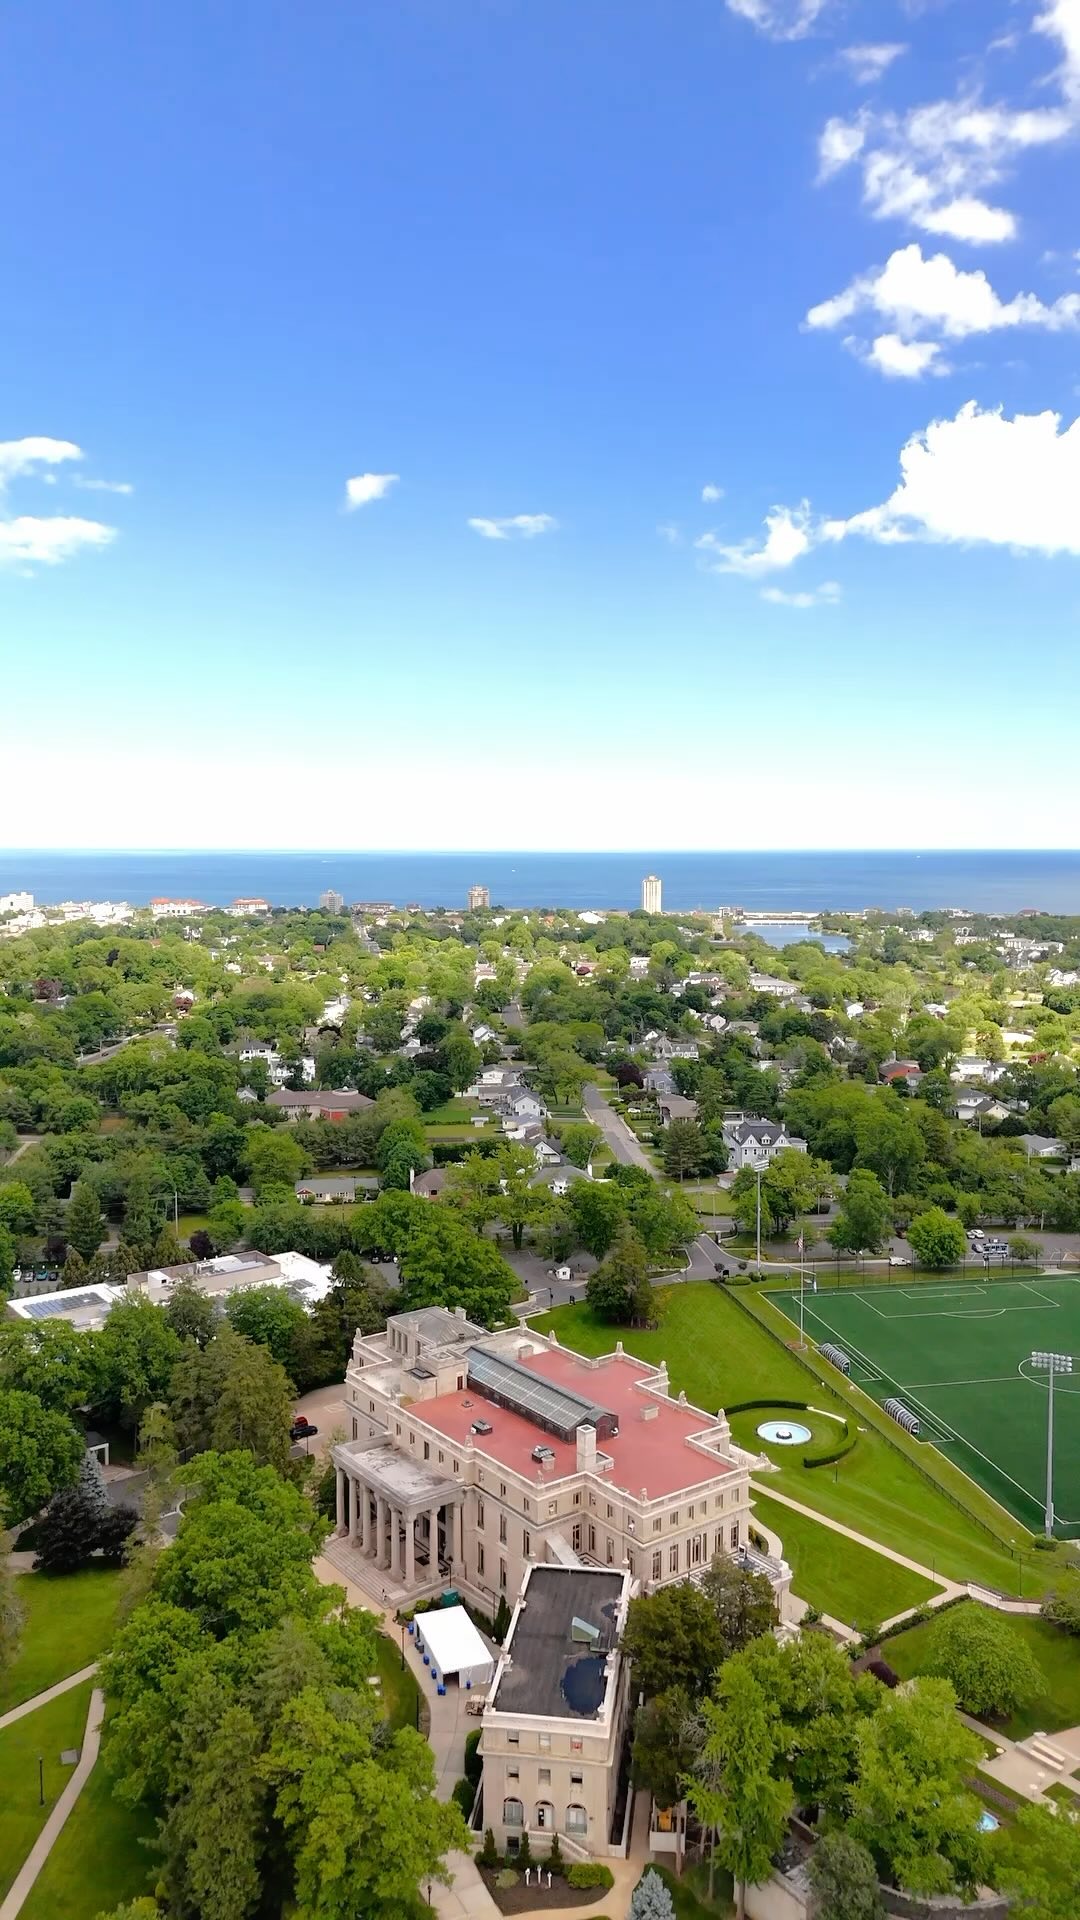 Soaring into summer with stunning campus views from above. 💙 🦅#CampusViews #MonmouthU